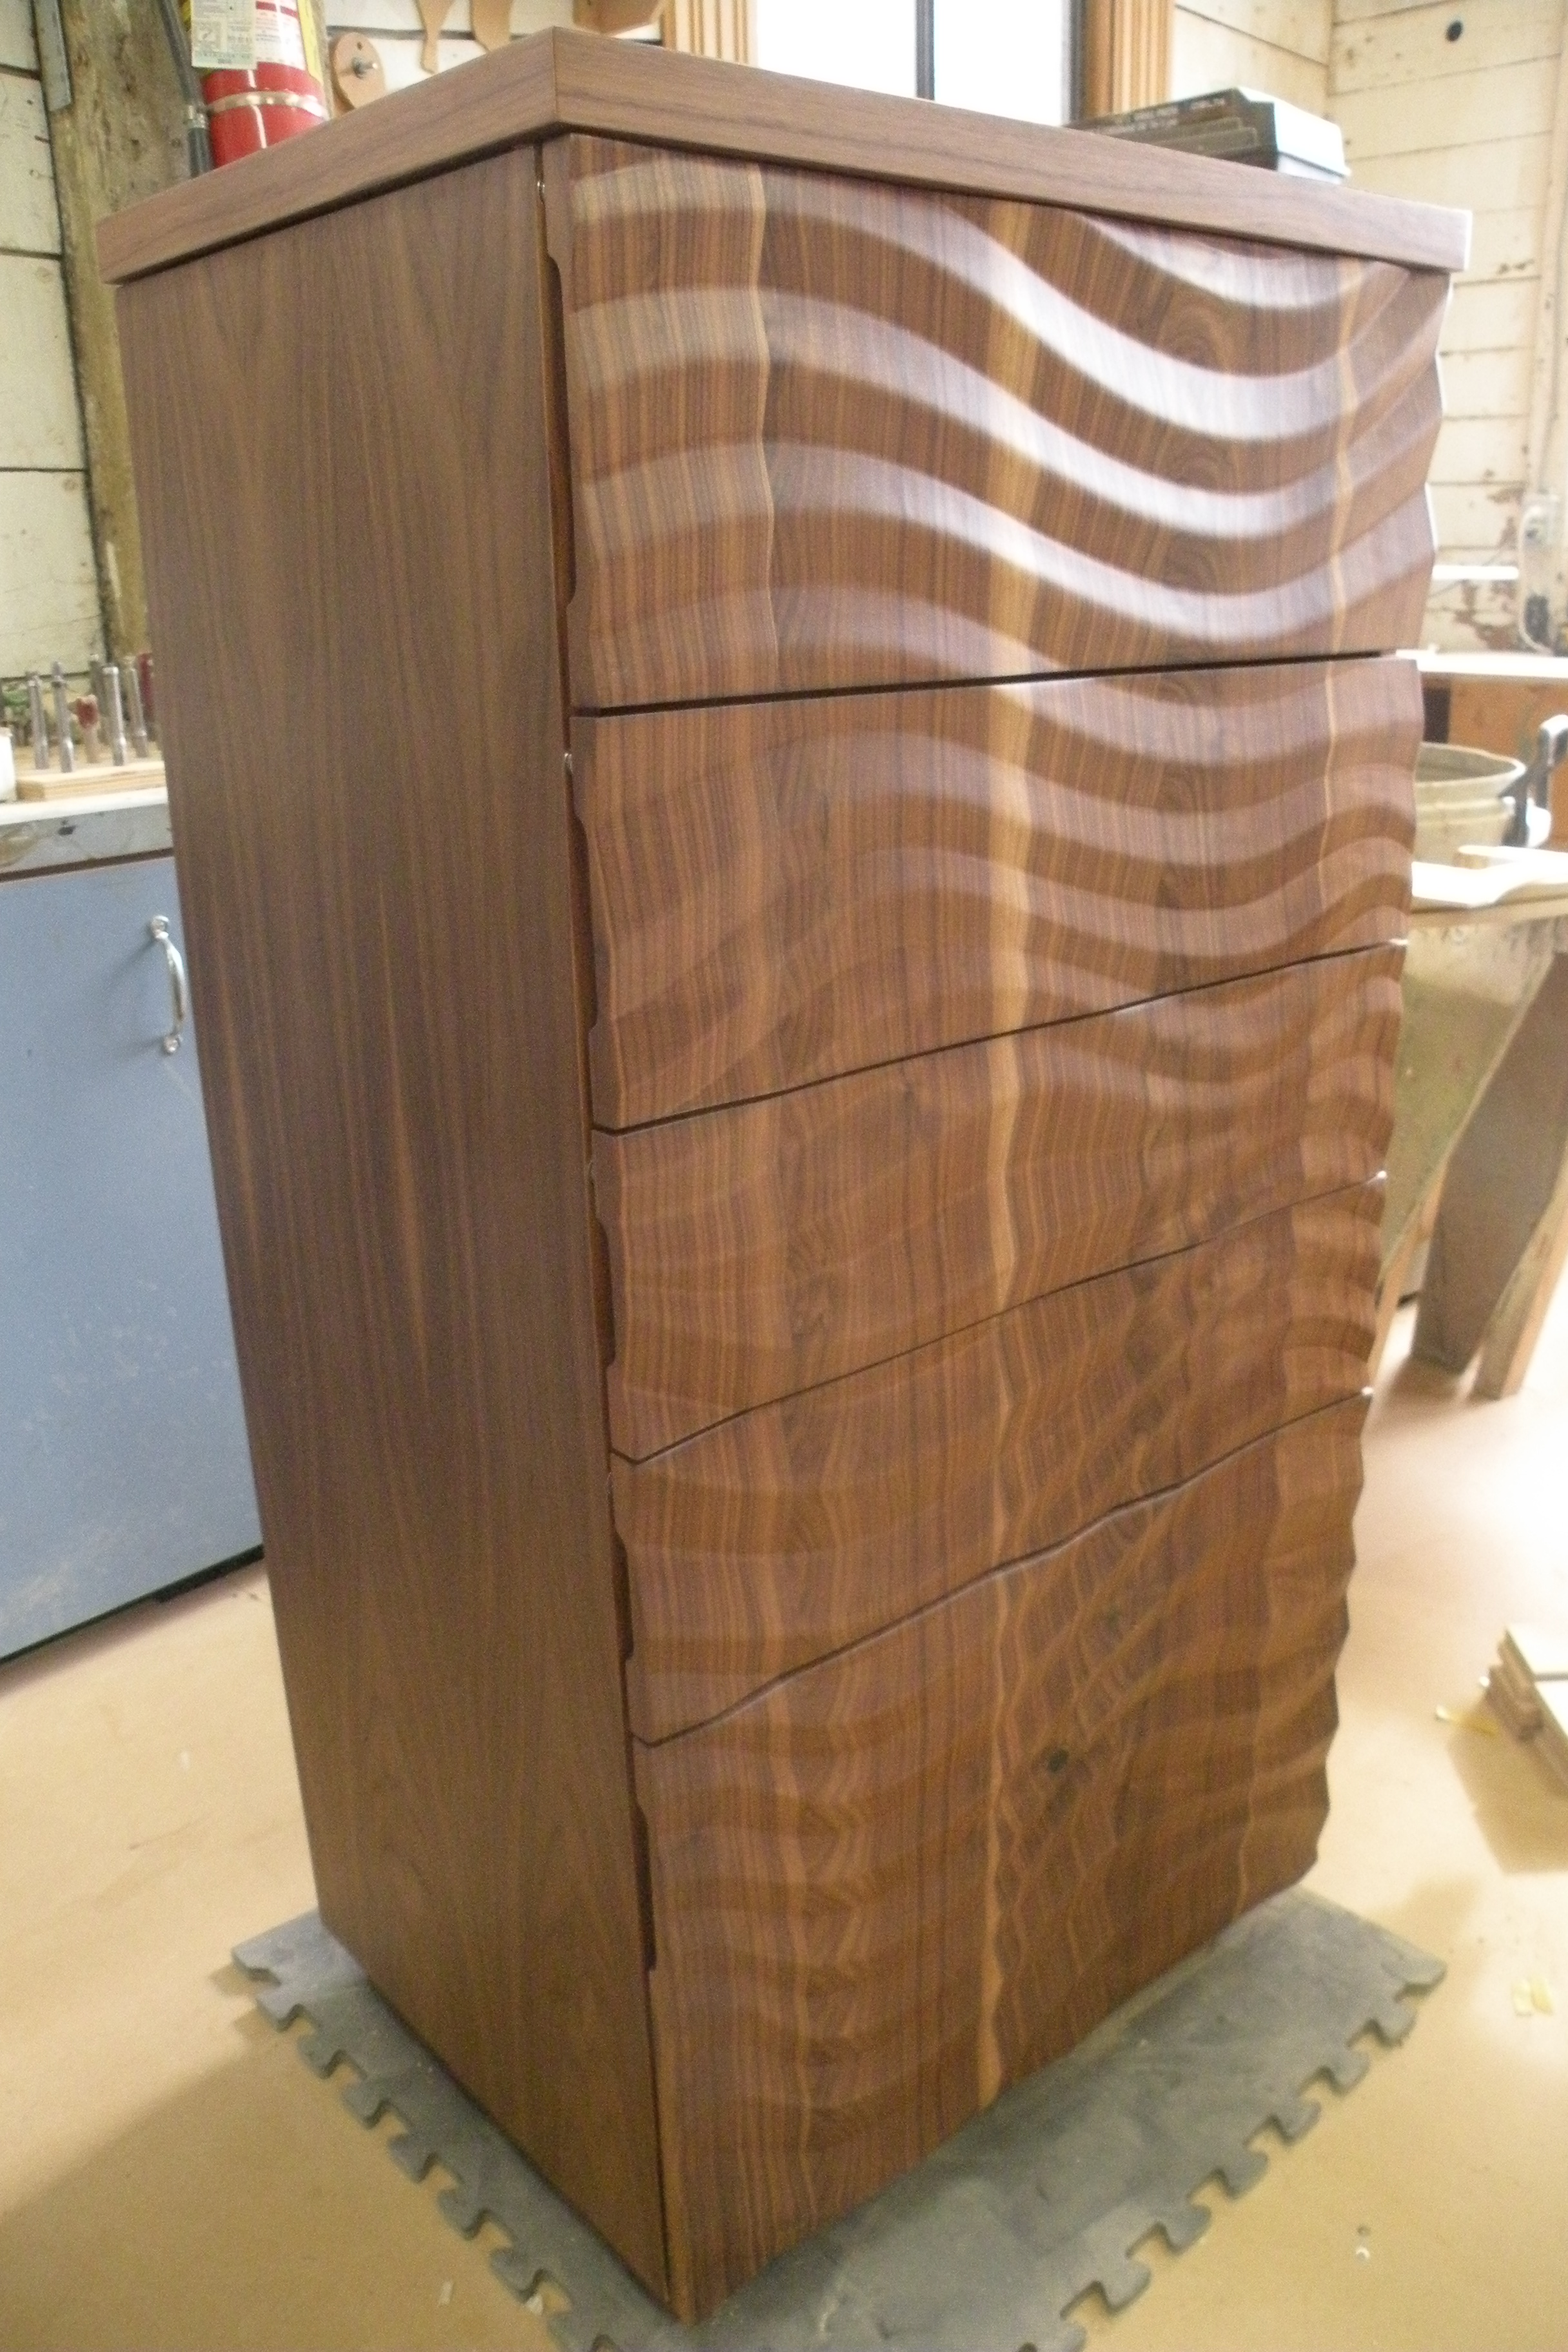 Woodworking Straight Line Designs Inc.